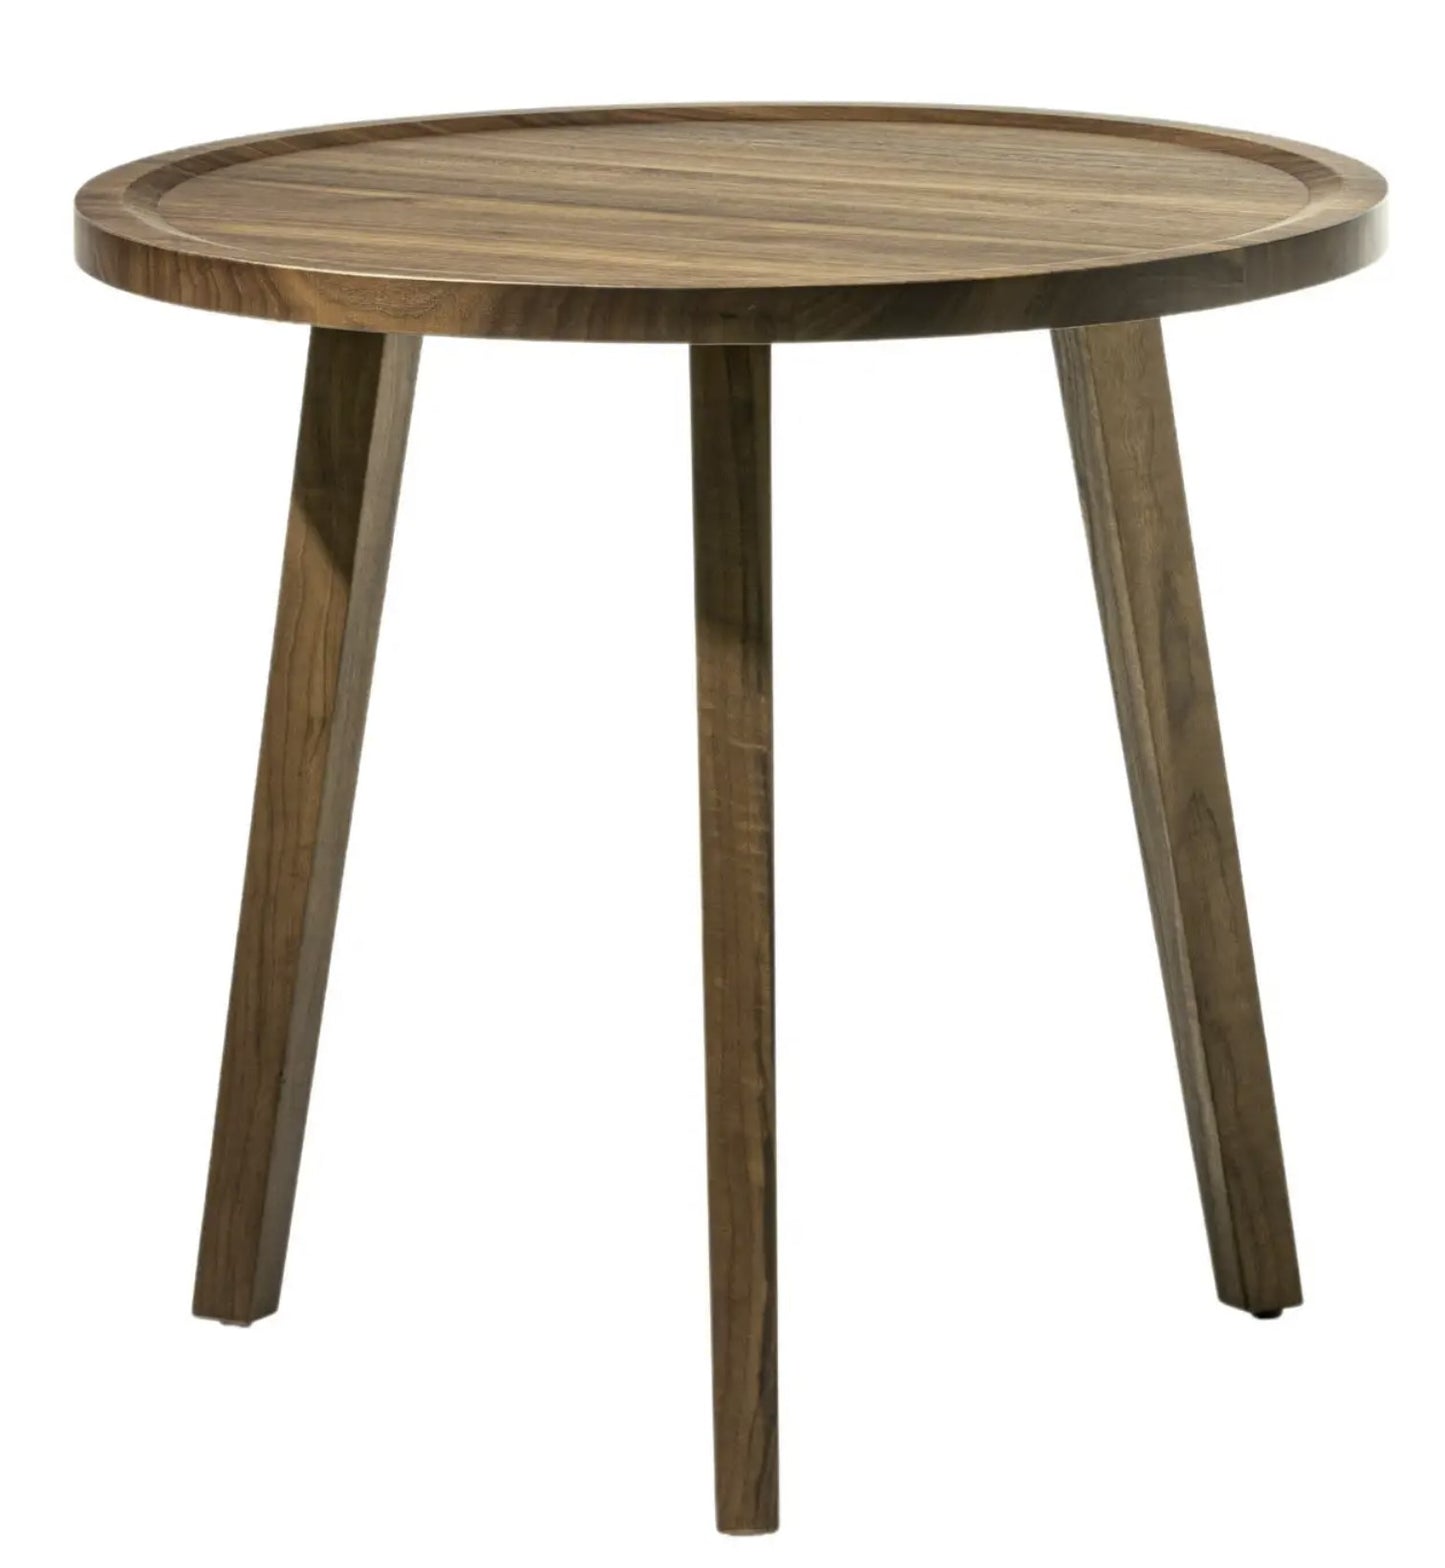 Gray 41 Natural Lacquered American Walnut Tea Table - $2,245.00